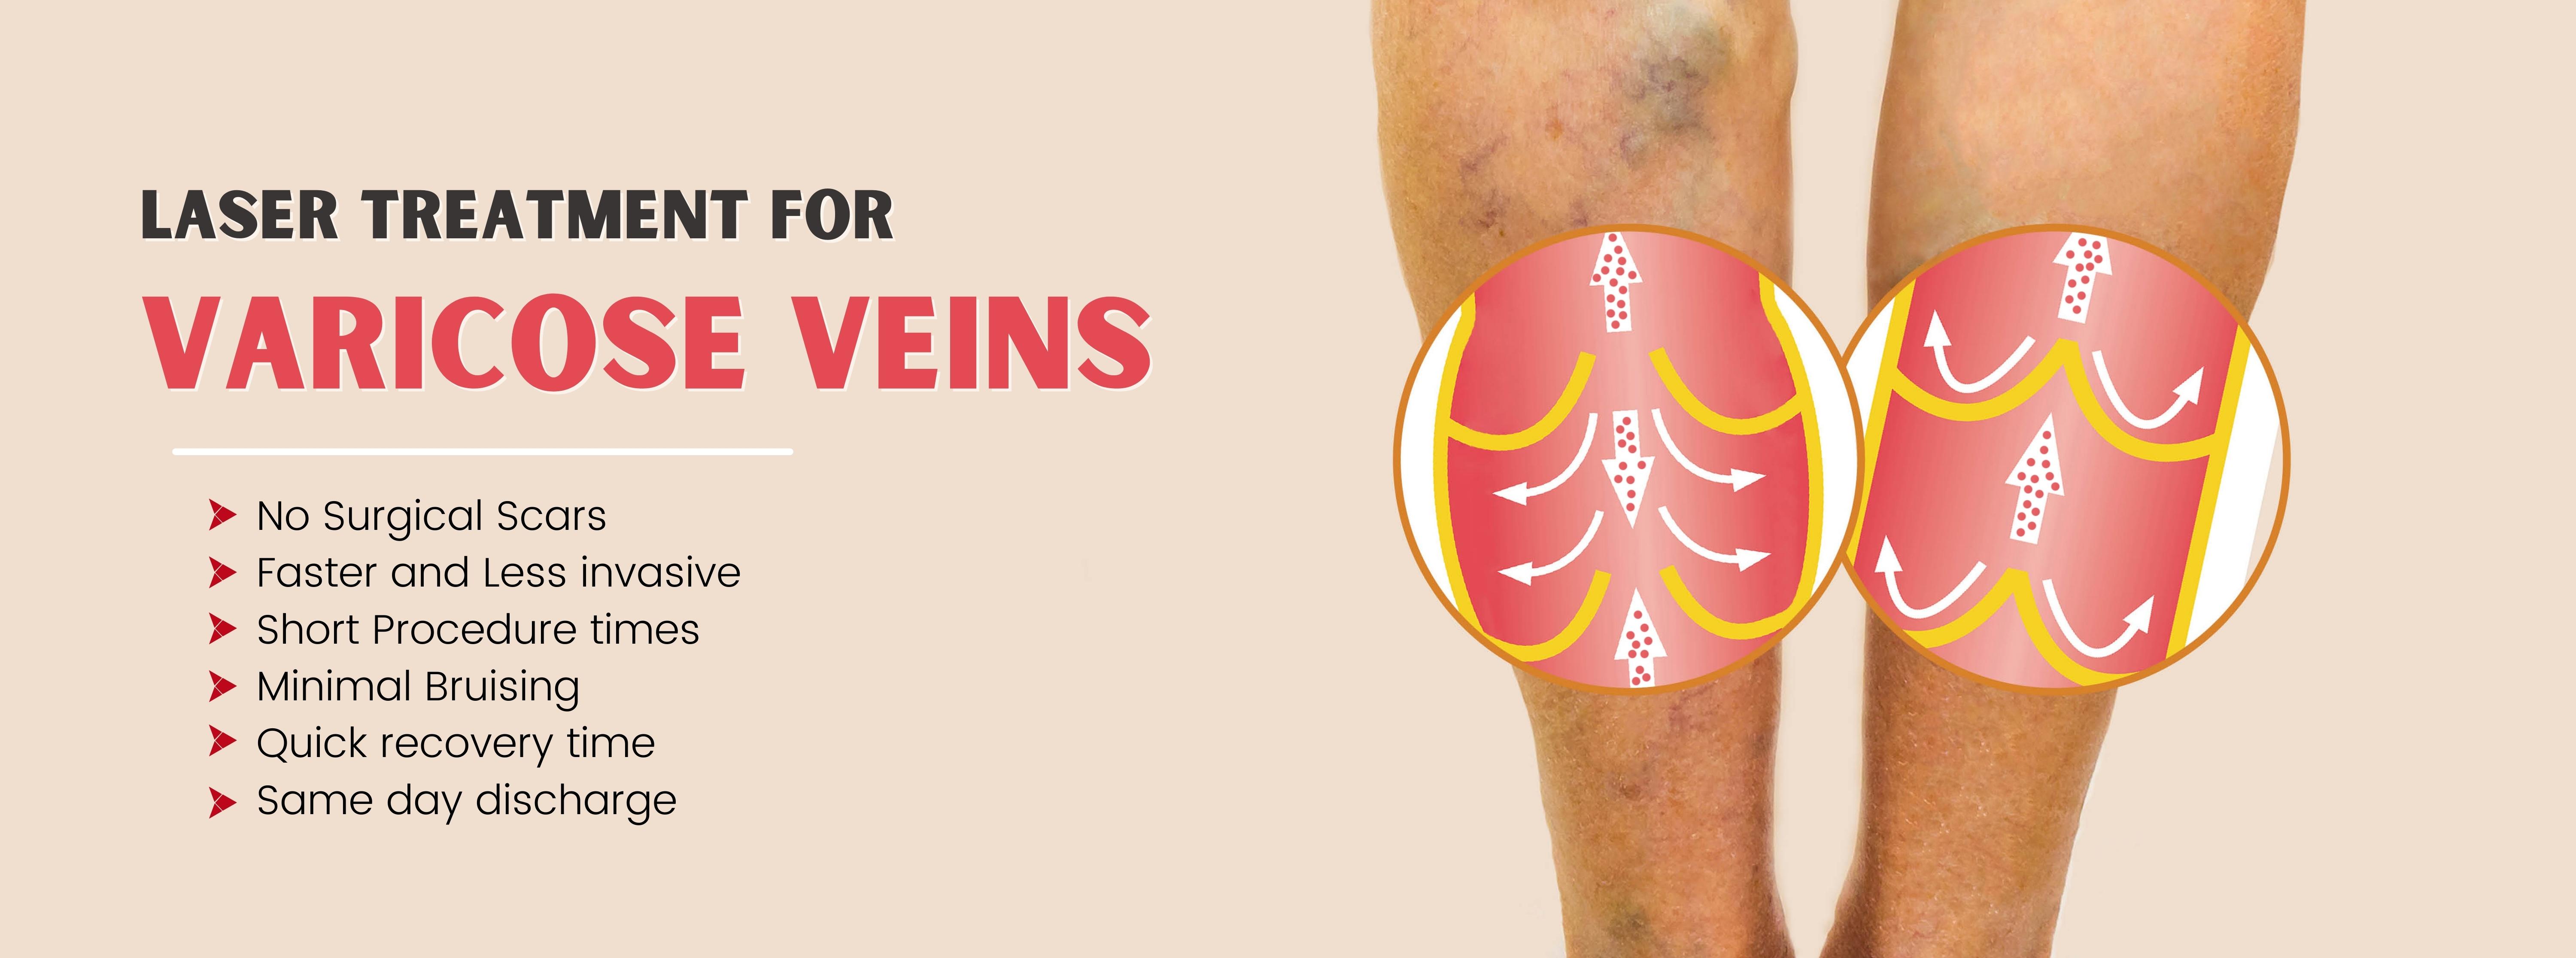 Varicose Veins Laser Treatment Cost In India